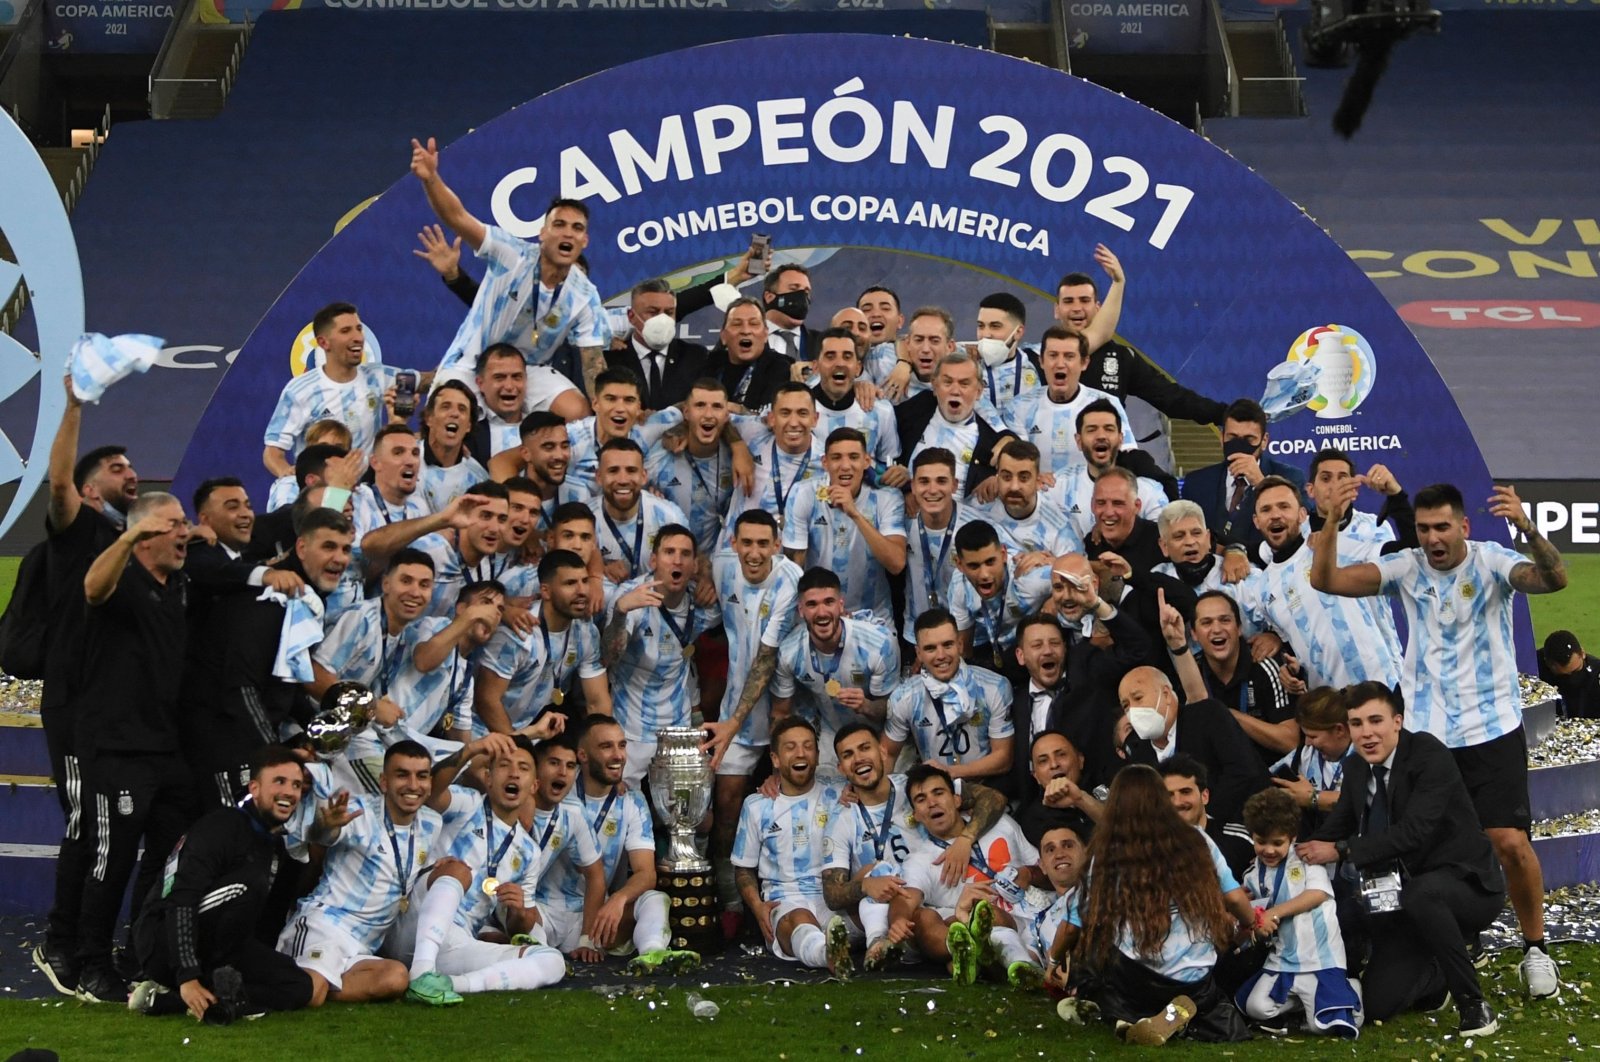 Players of Argentina celebrate with the trophy after winning the 2021 Copa America final against Brazil at Maracana Stadium in Rio de Janeiro, Brazil, July 10, 2021. (AFP Photo)